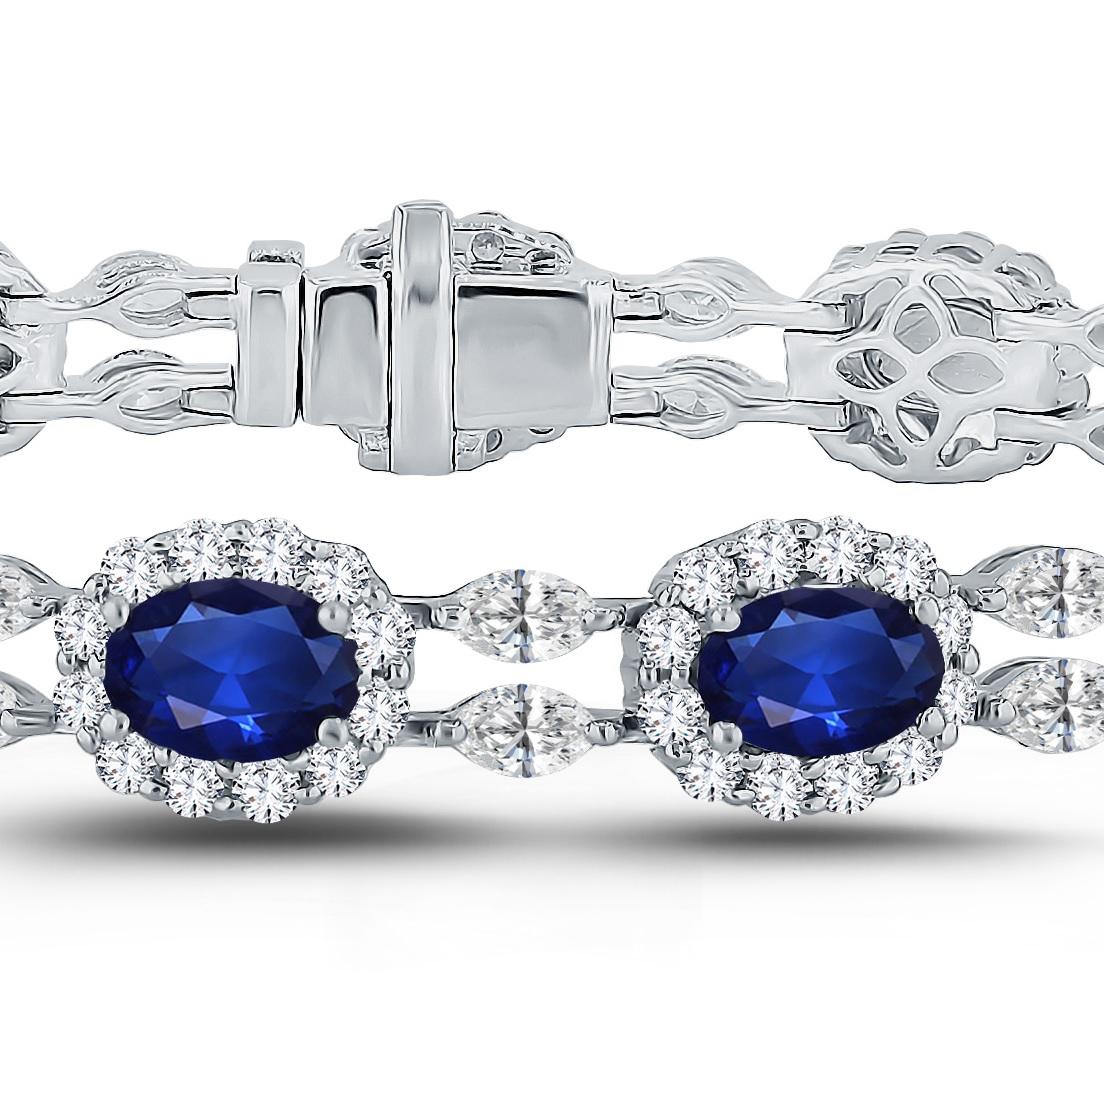 Elevate your jewelry collection with this exceptional bracelet, a true embodiment of timeless beauty and sophistication. It features thirteen resplendent oval-cut blue sapphires, collectively weighing 9.42 carats, each delicately framed by a halo of